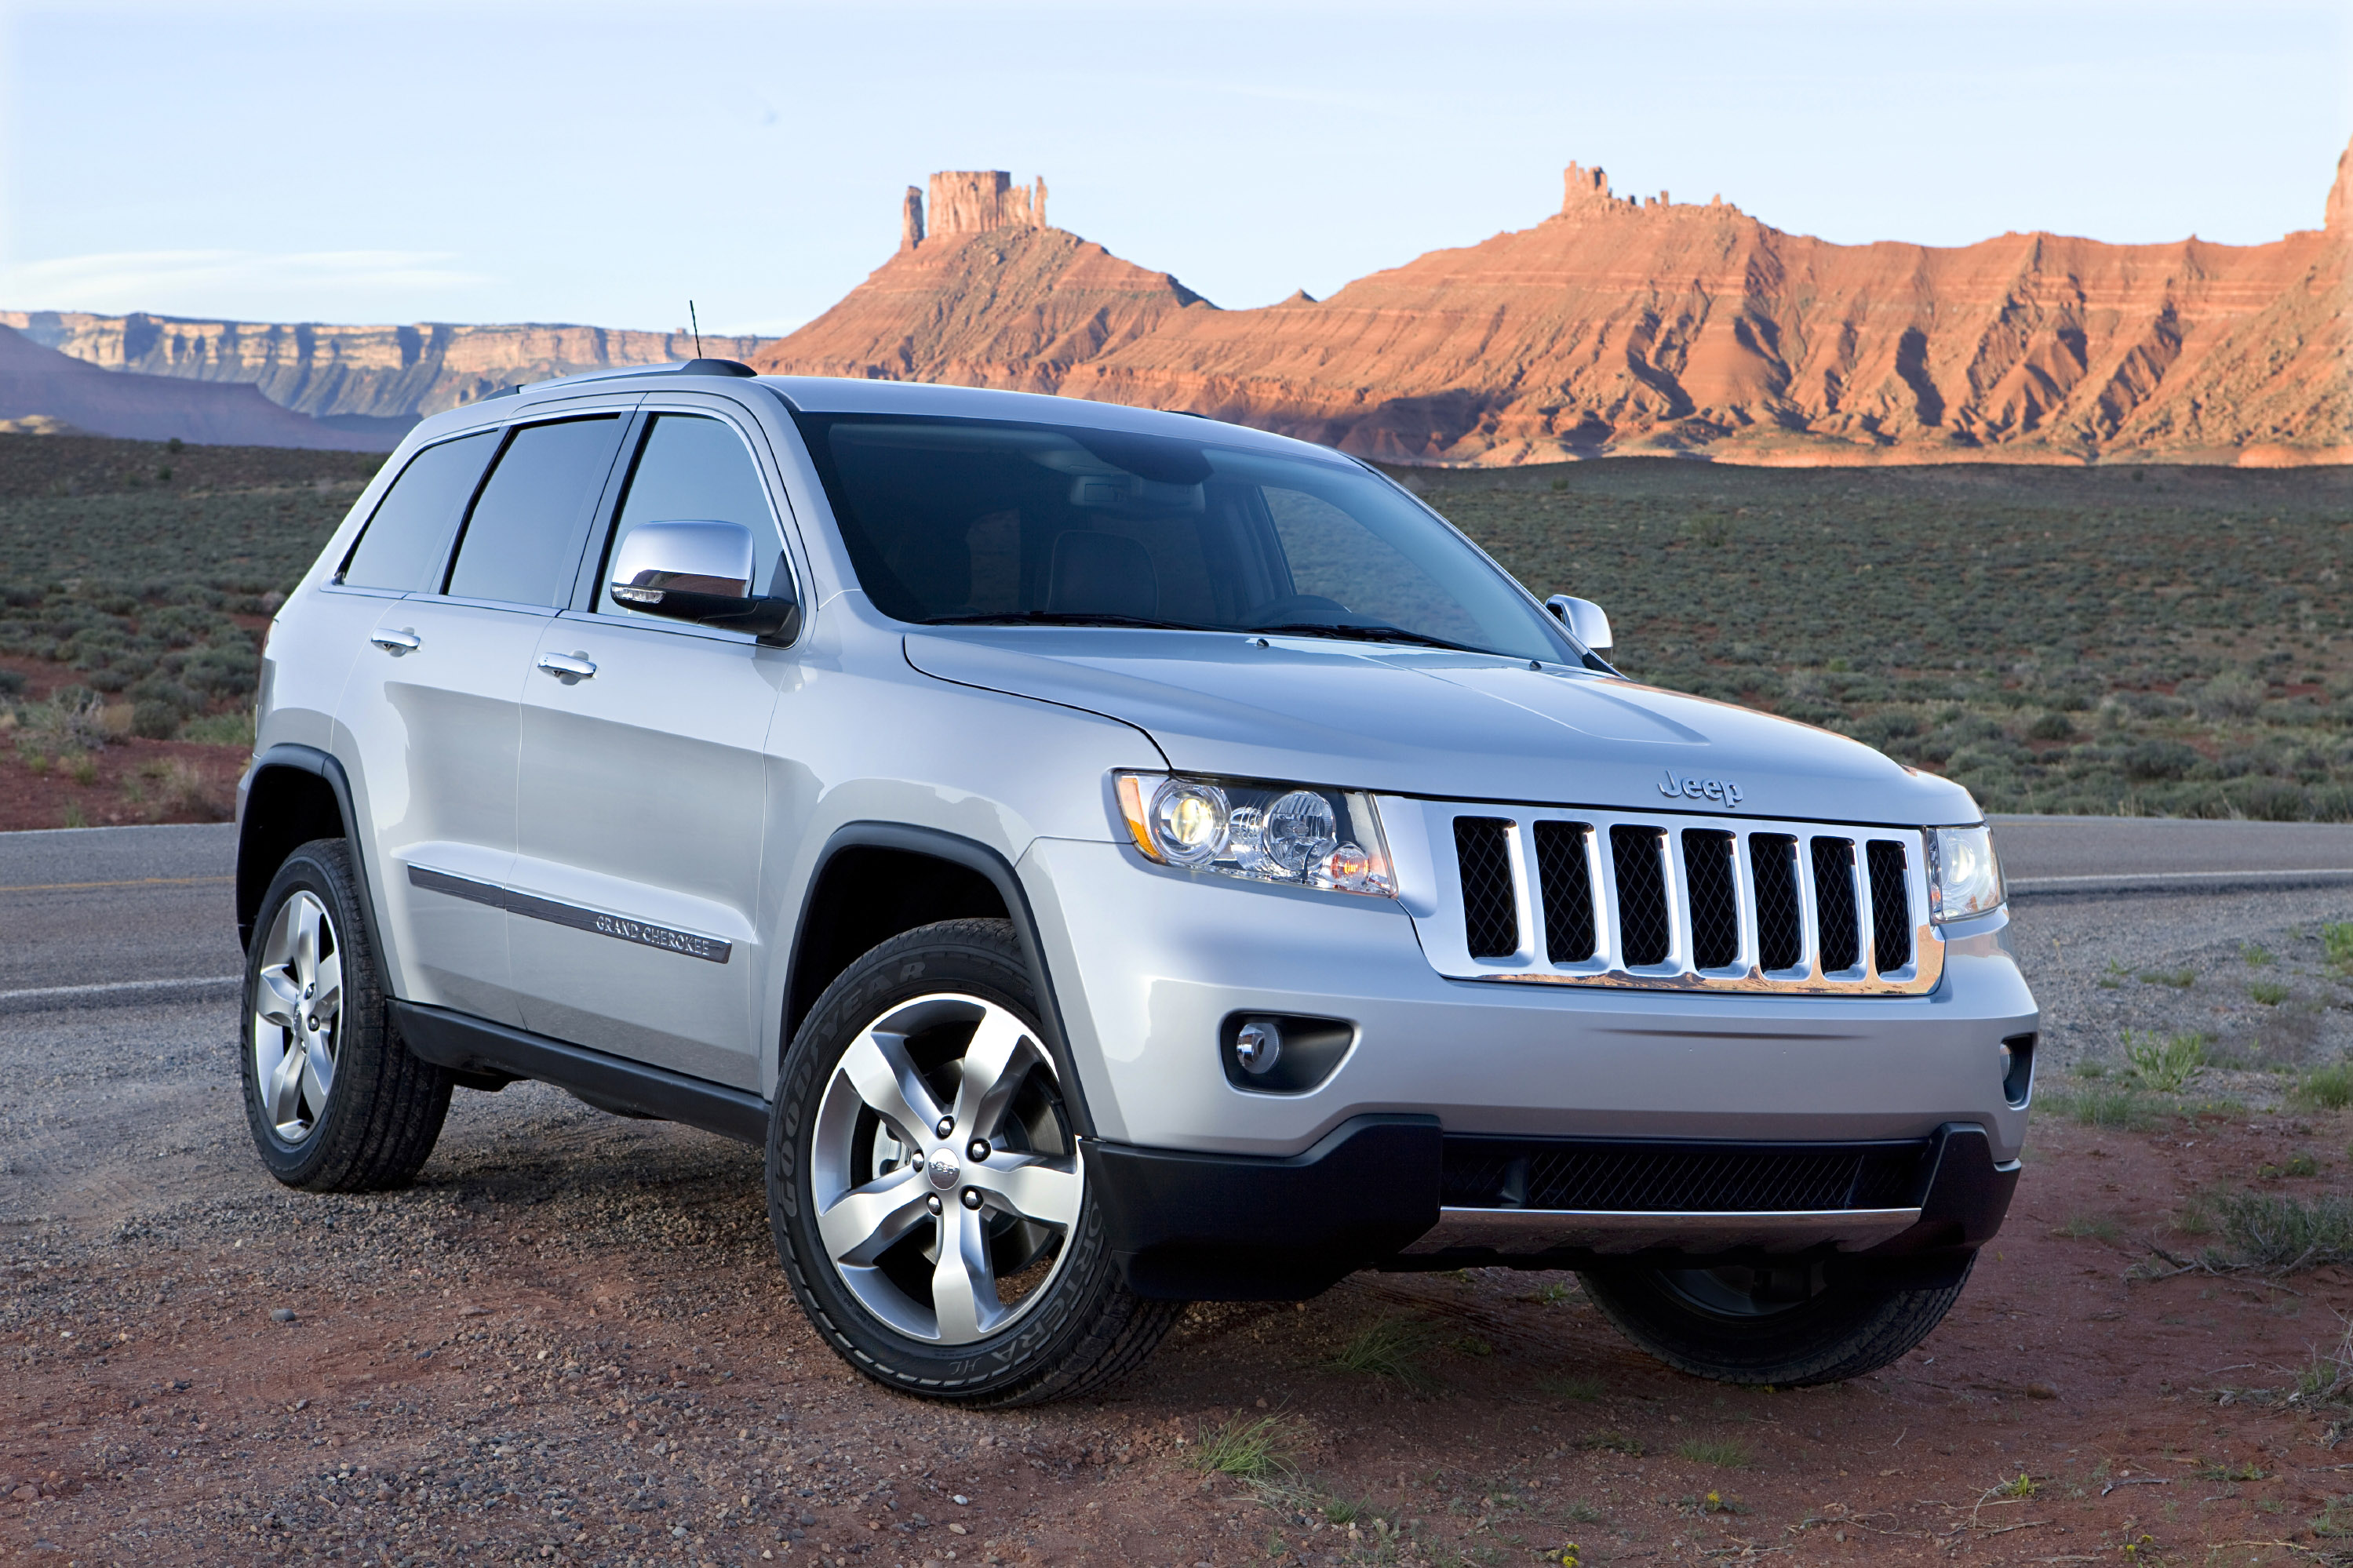 2011 Jeep Grand Cherokee HD Pictures